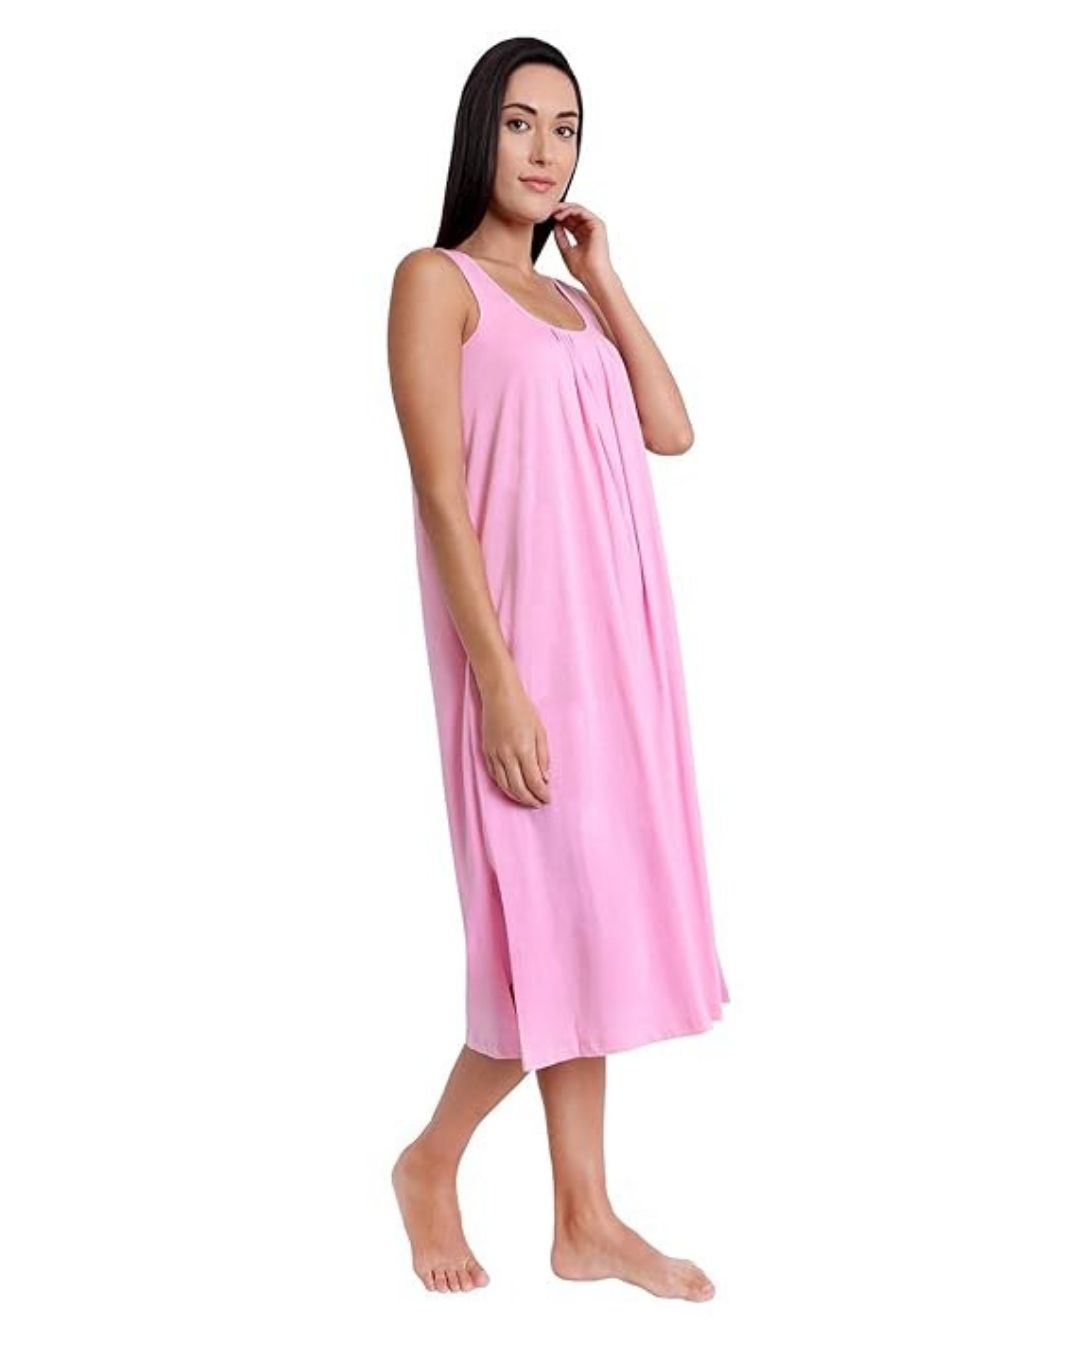 TWGE Cotton Full Length Camisole for Women - Long Innerwear - Color Pink